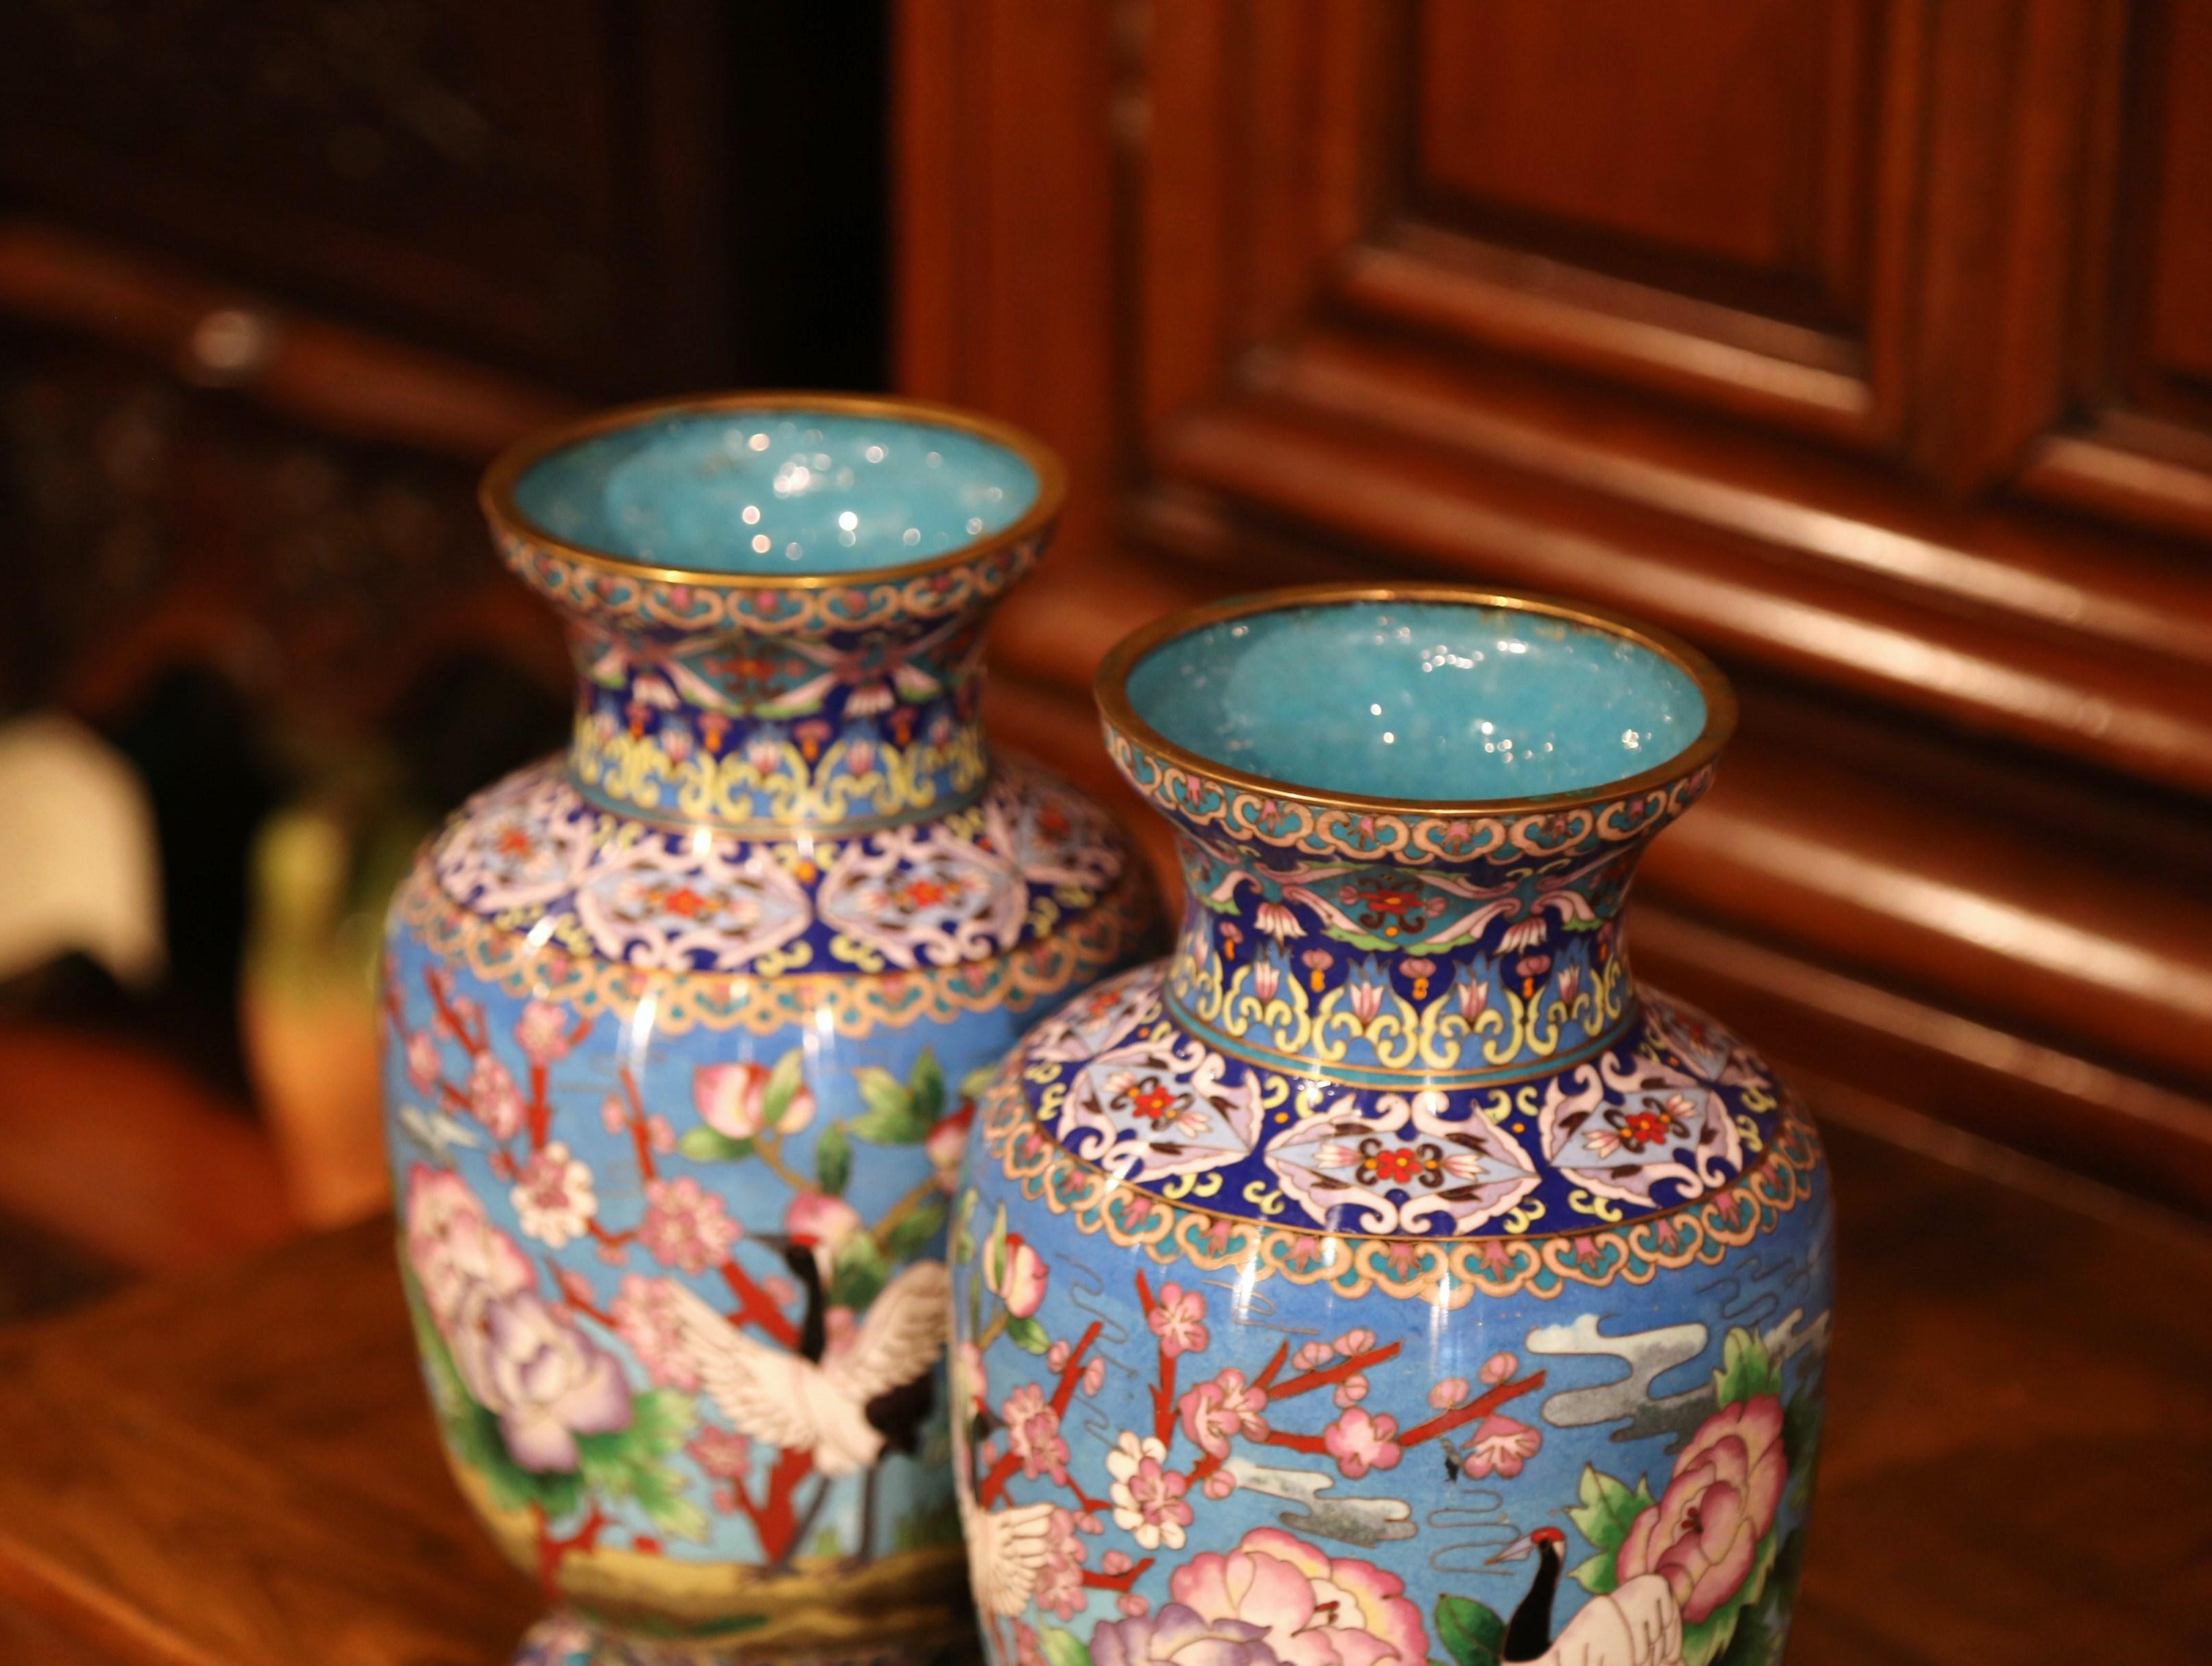 Pair of Mid-20th Century Chinese Cloisonné Vases with Bird and Floral Decor 1